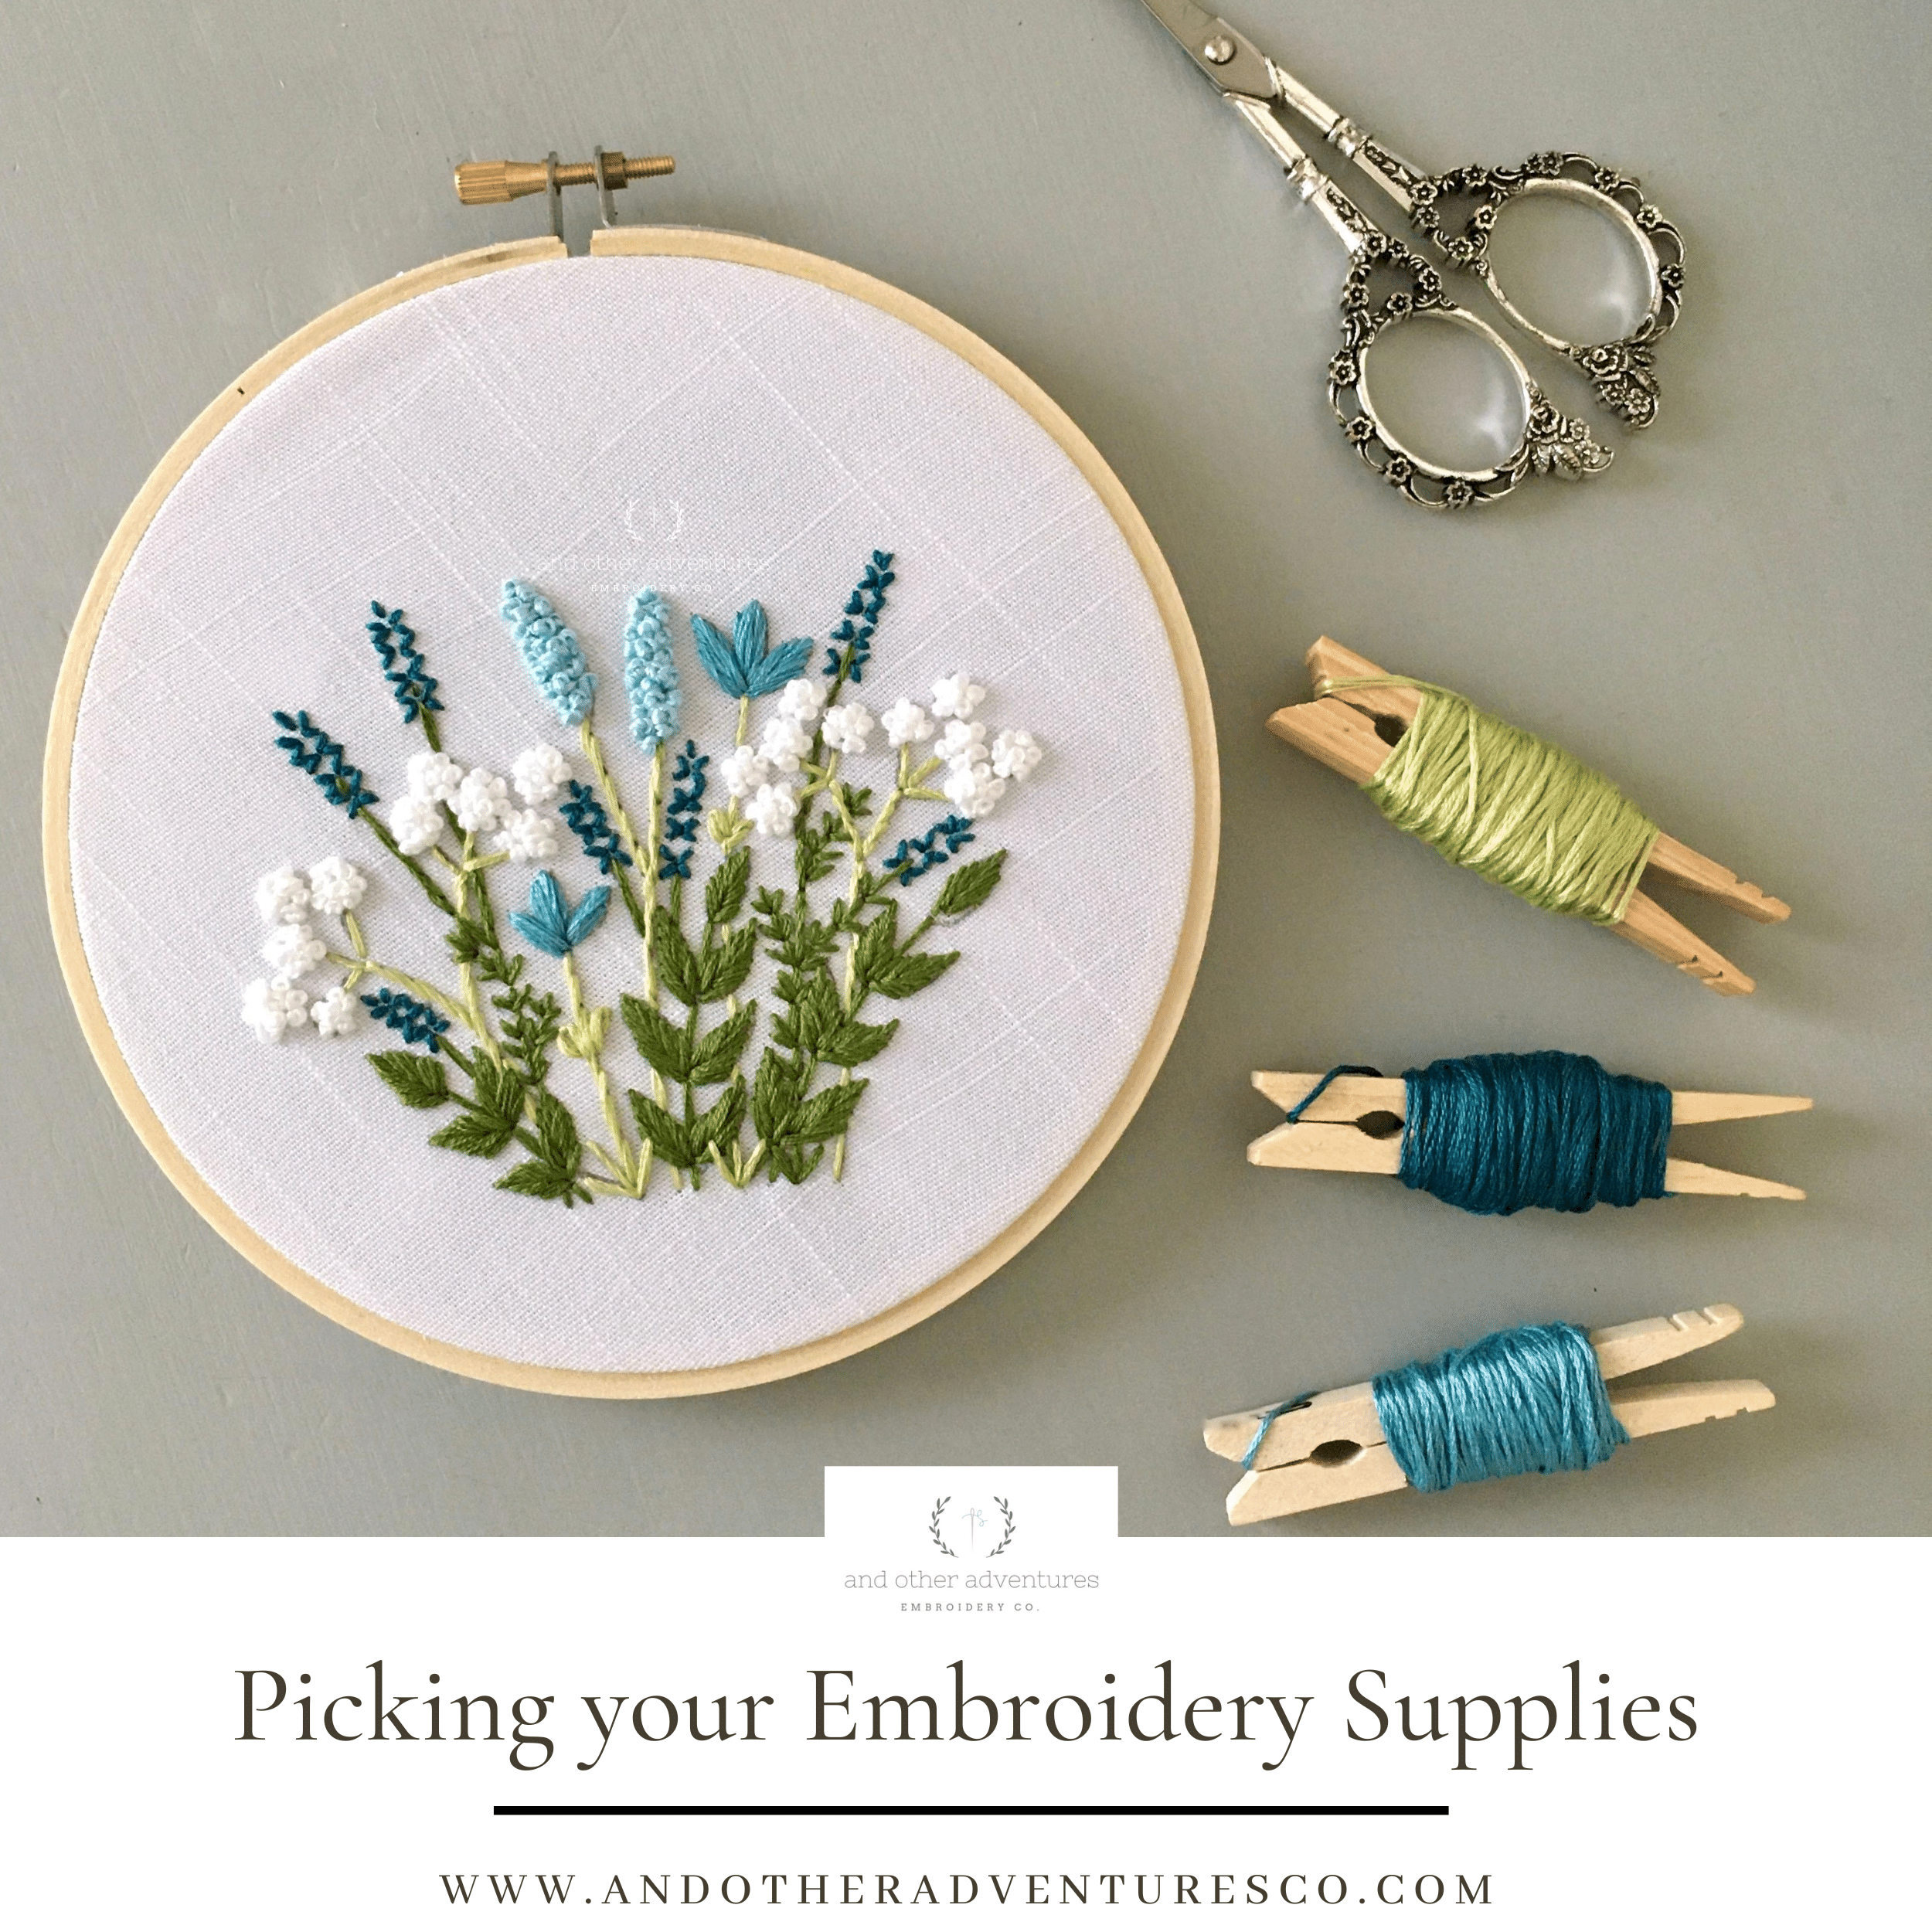 10 Places to Get Embroidery Supplies for Your Business